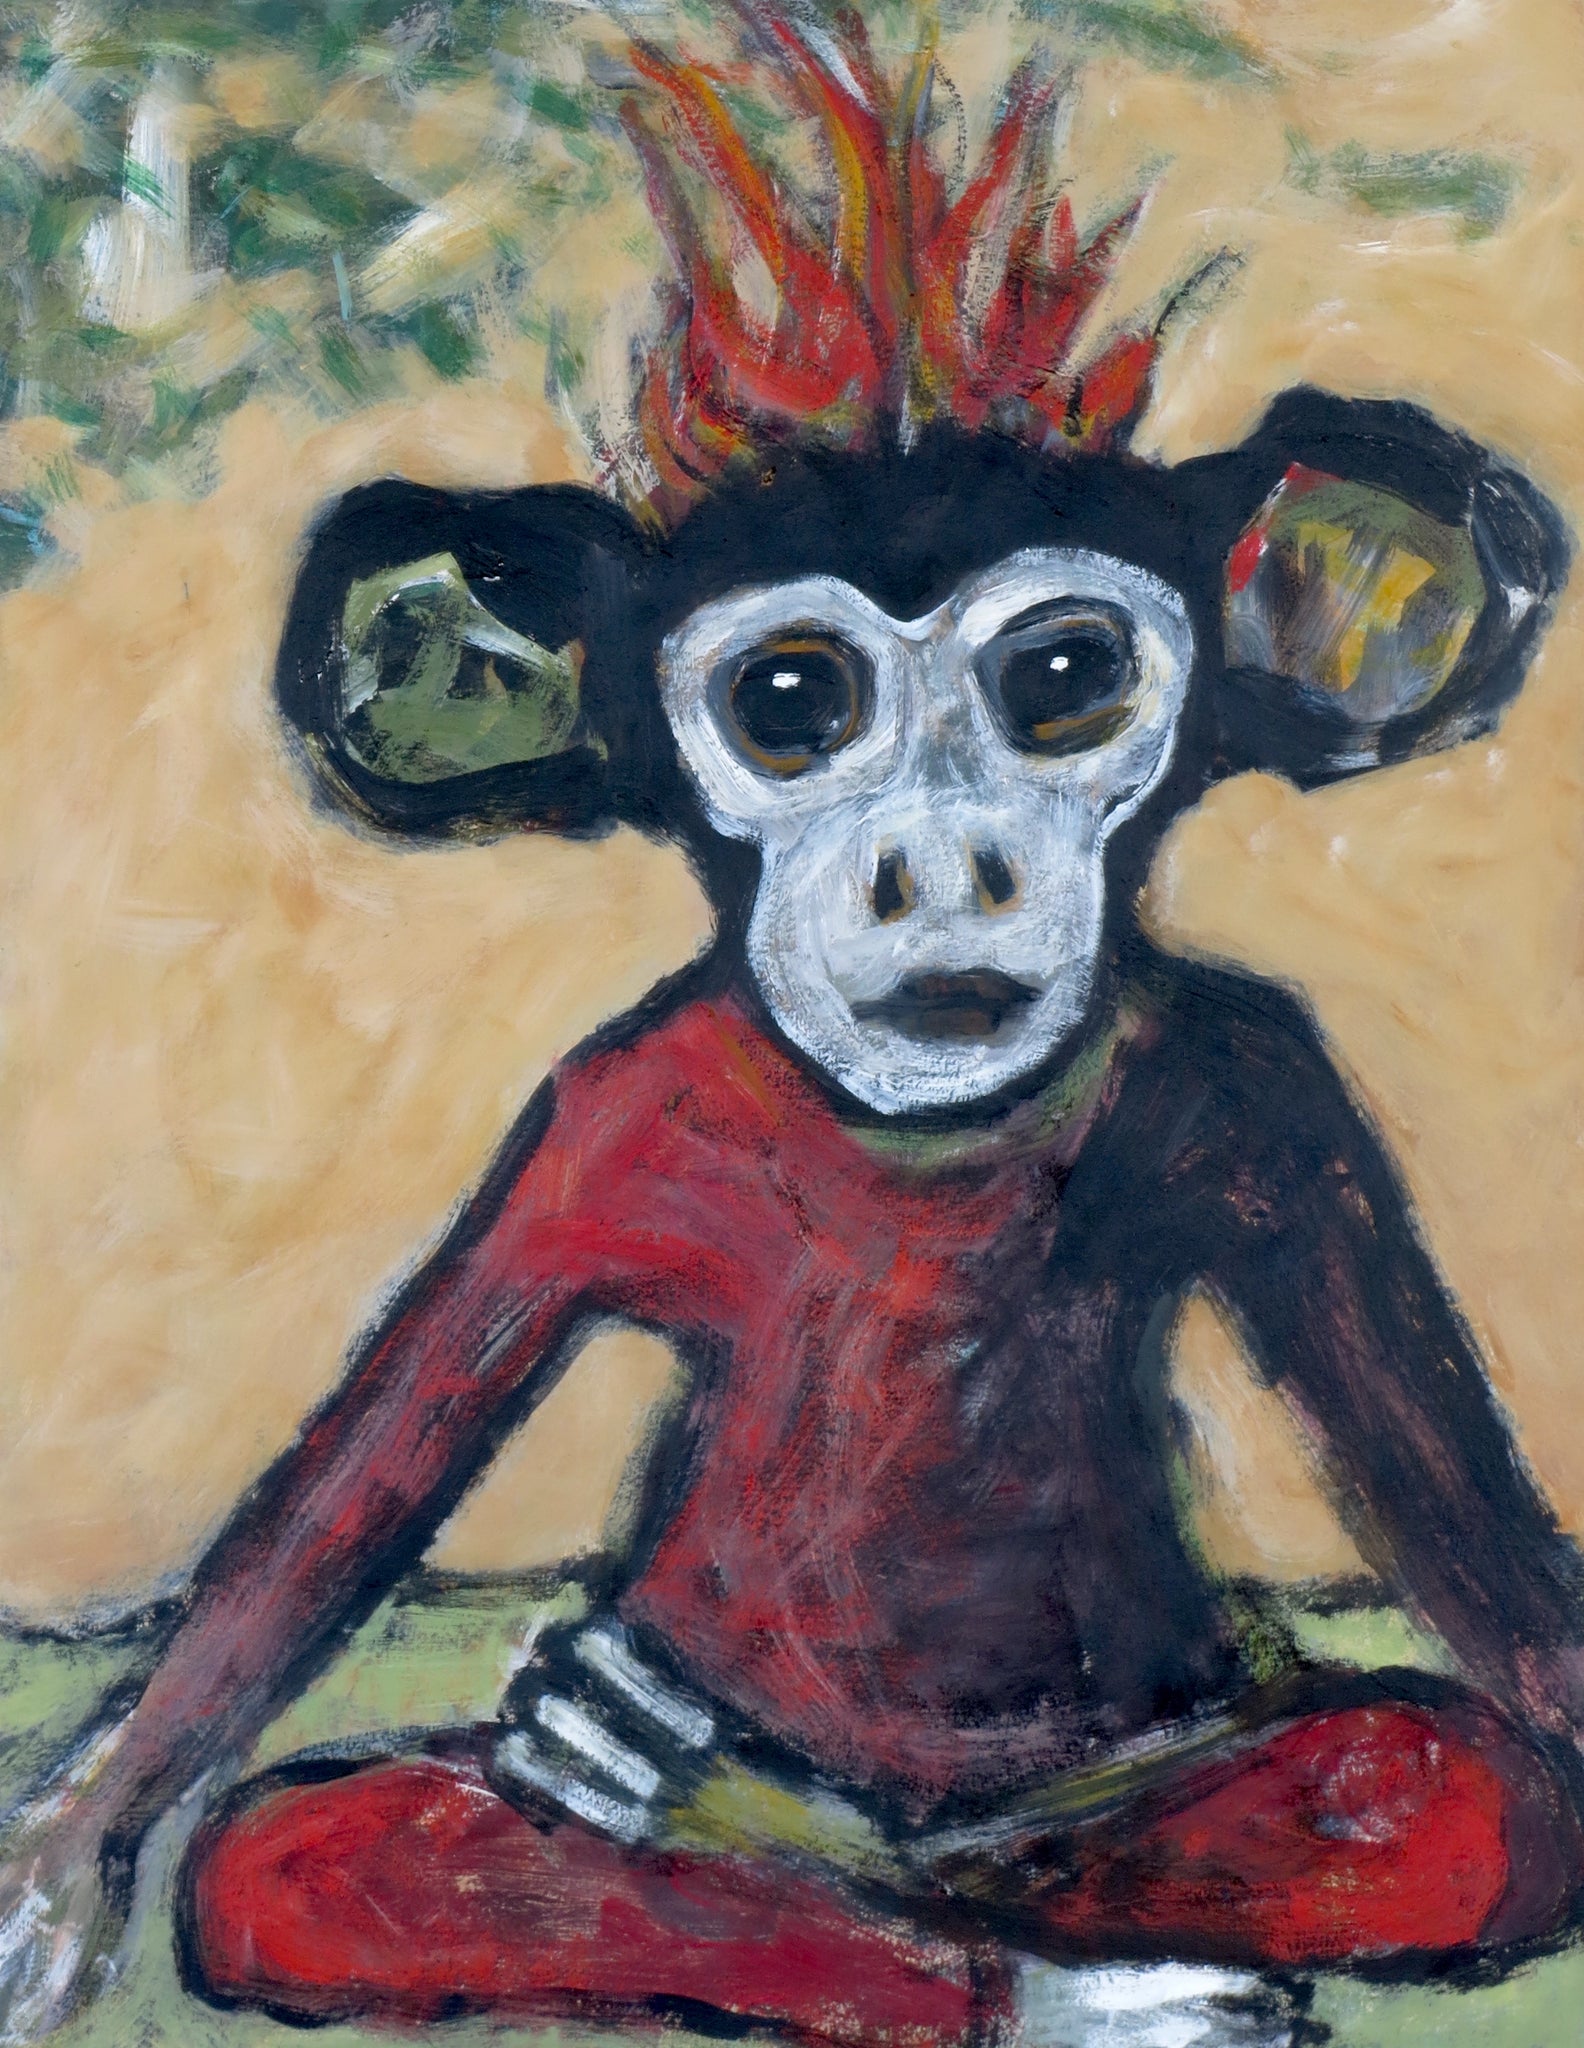 "Monkey sits Under the Bodhi Tree, Hair on Fire" - ongoing series